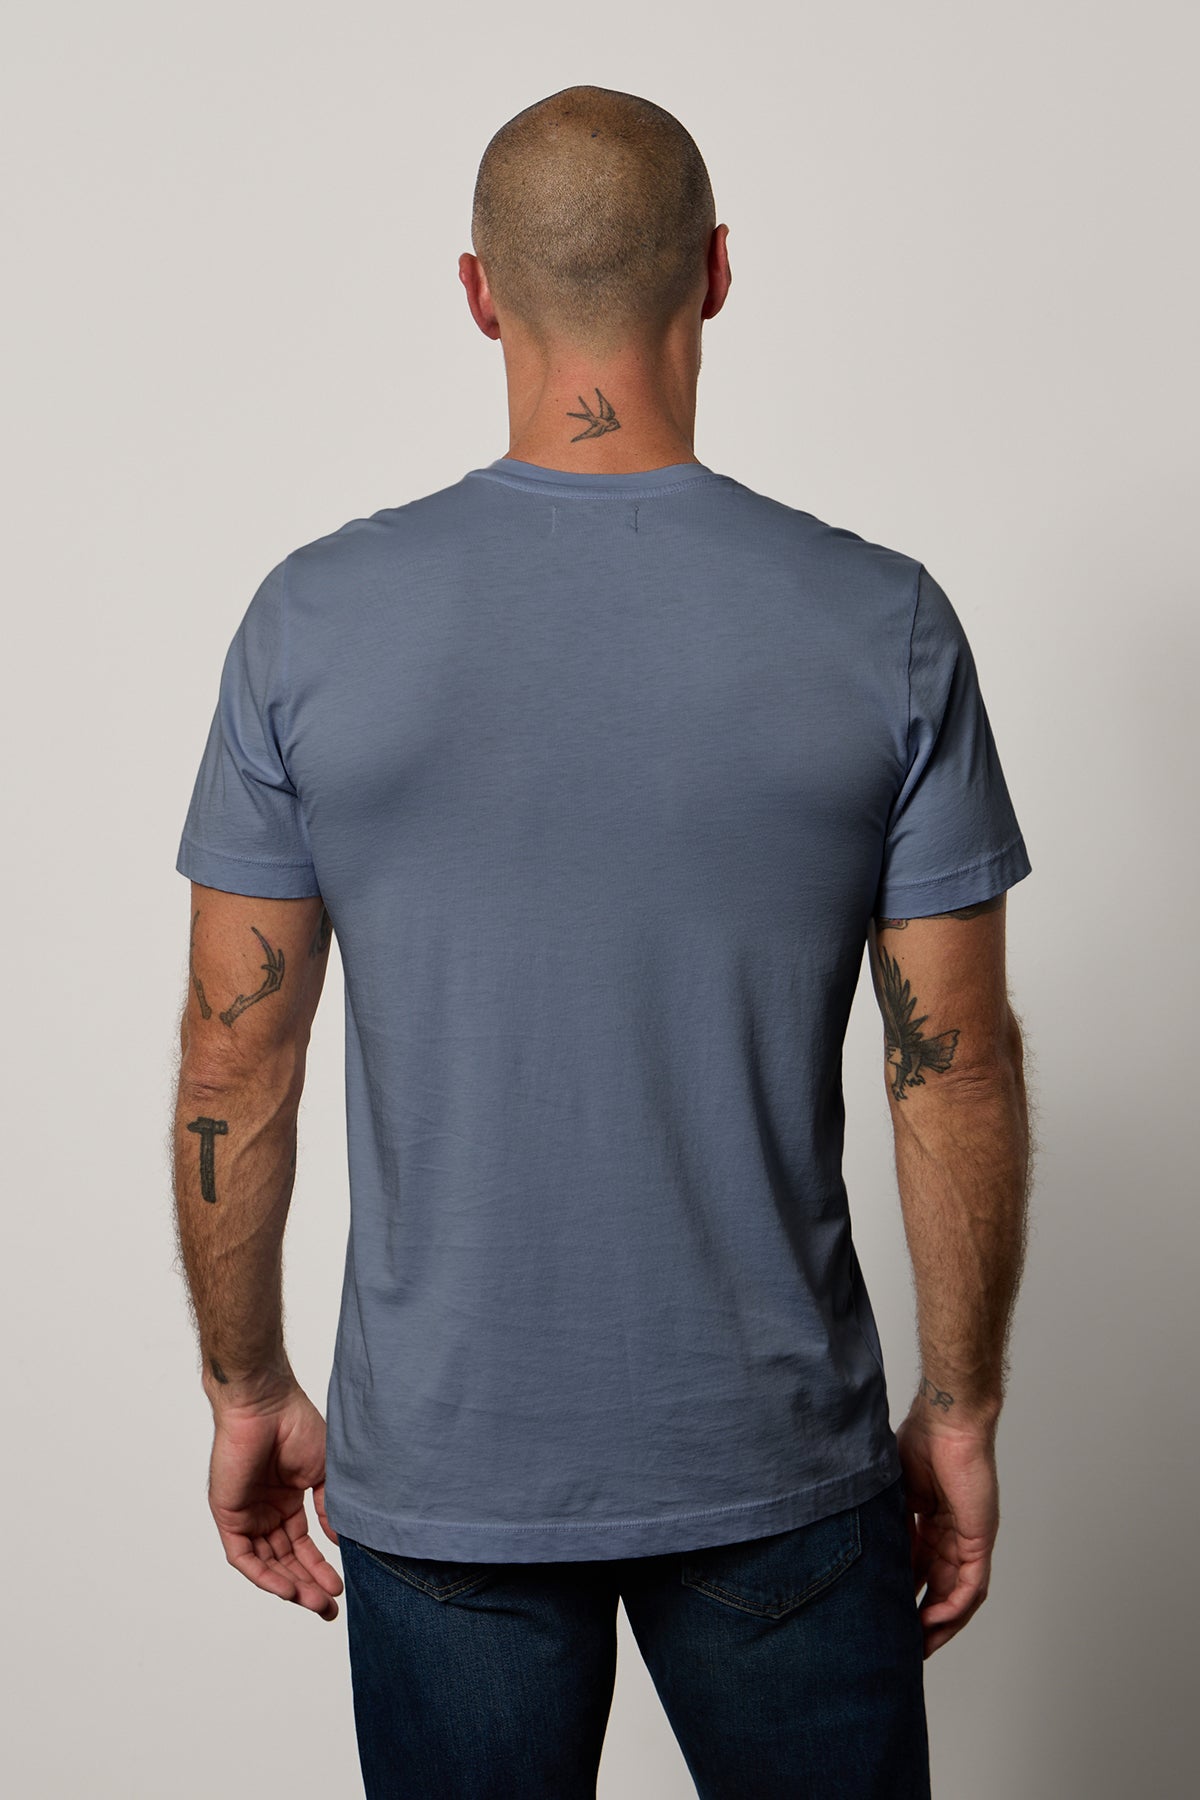 The Velvet by Graham & Spencer Howard Whisper Classic Crew Neck Tee offers a vintage-feel softness from the back view of a man.-25793661272257